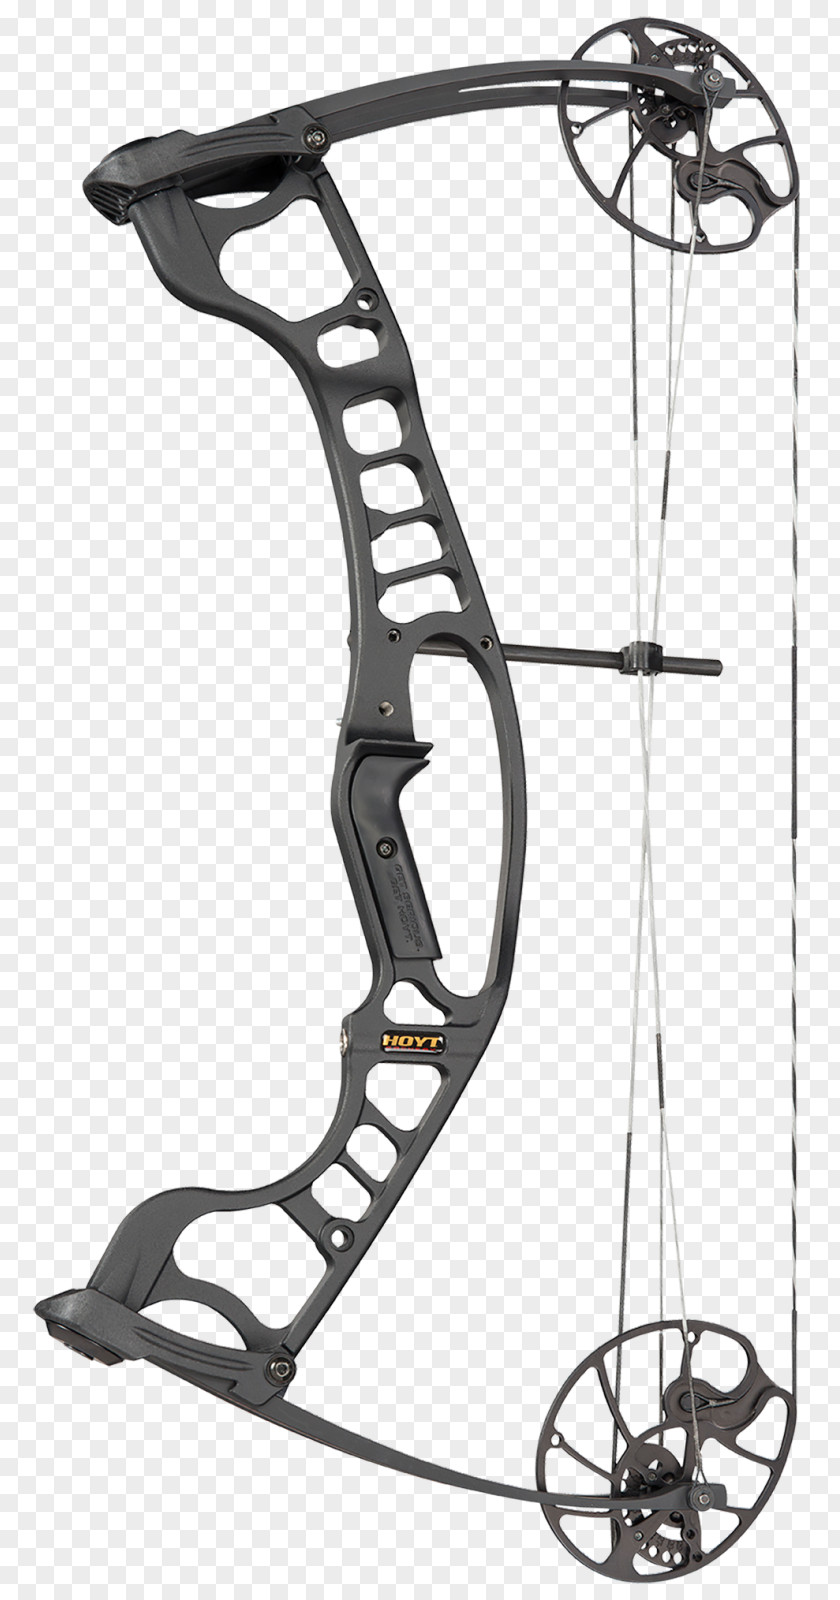 Archery Compound Bows Bow And Arrow Bowhunting PSE PNG